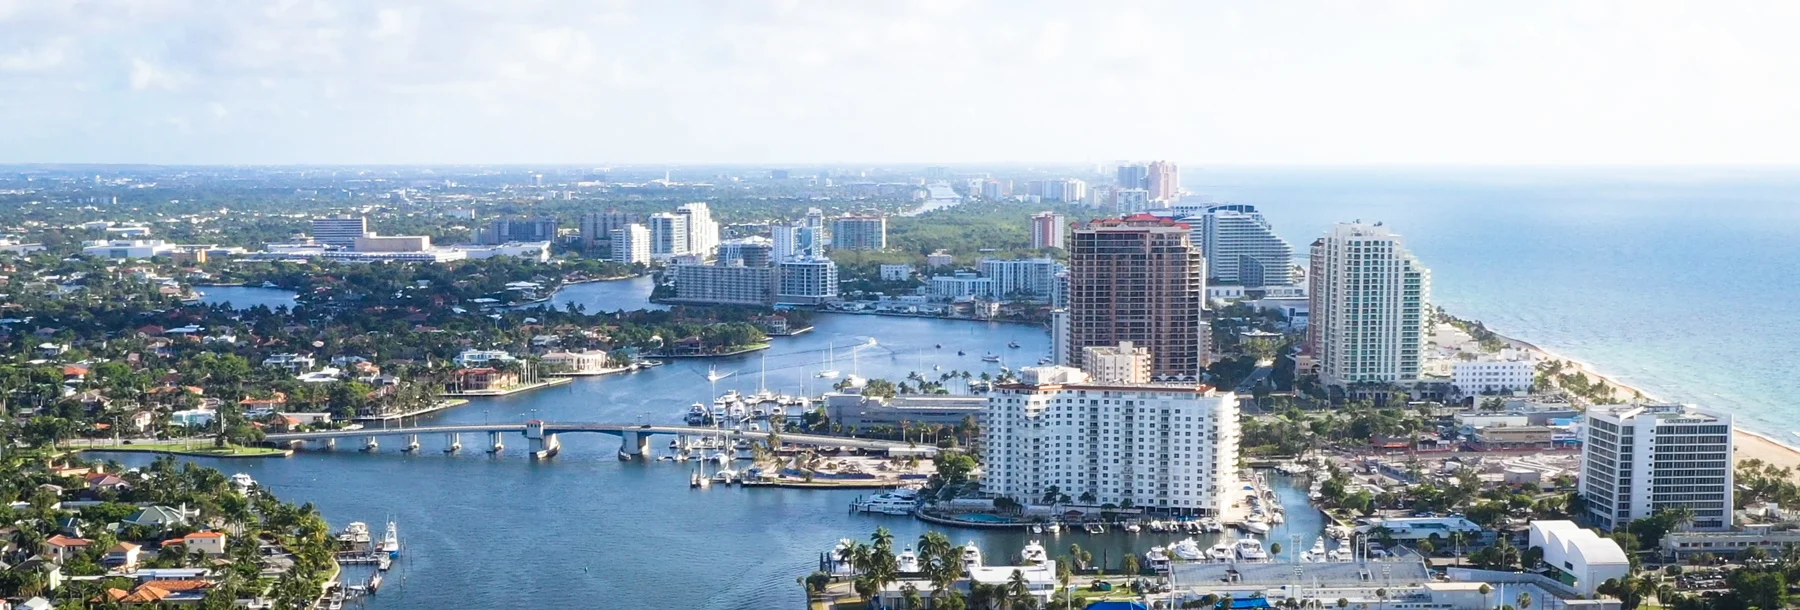 The City of Fort Lauderdale reduces vehicle downtime by 28% with fleet diagnostic reports